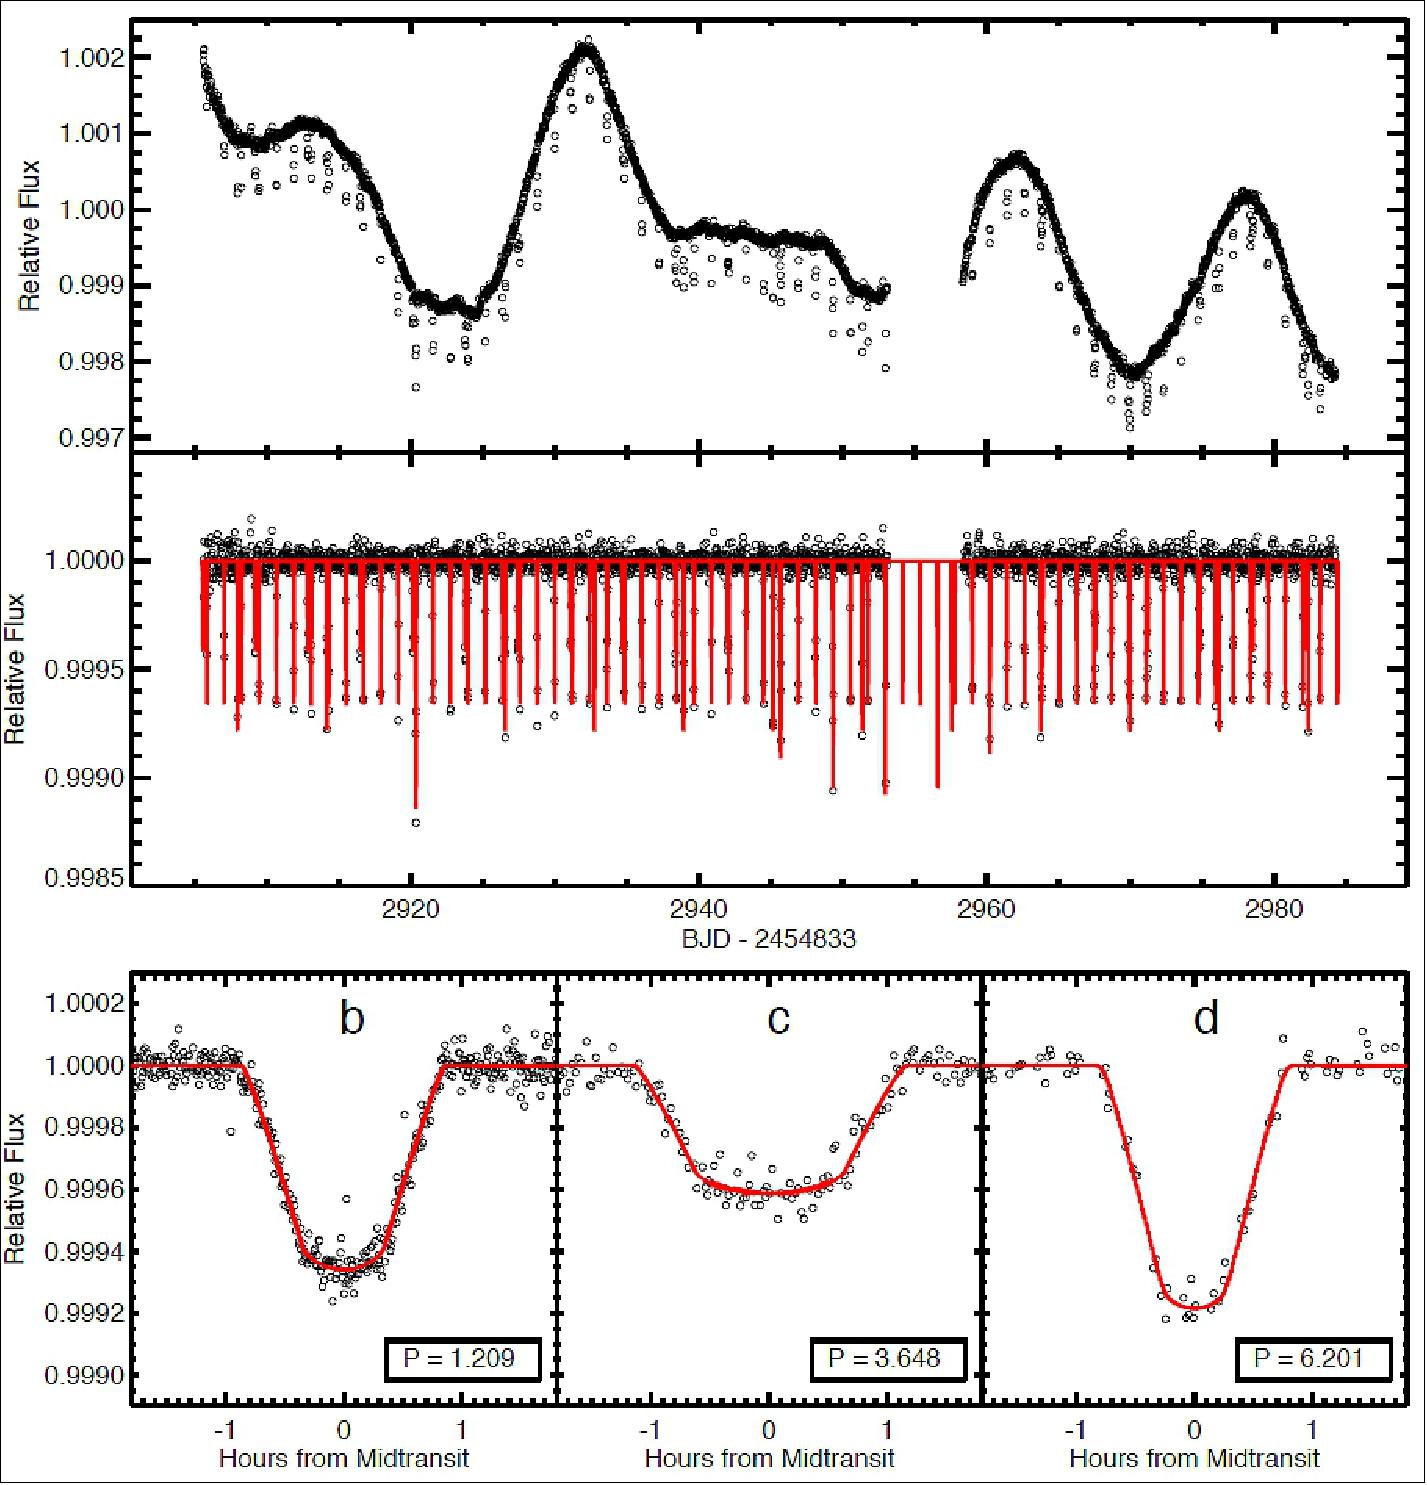 Figure 36: Top: The full K2 light curve of GJ 9827 from Campaign 12, corrected for systematics. Middle: The corrected K2 lightcurve with best-fit low frequency variability removed. Bottom: Phase folded K2 light curves of GJ 9827 b, c. and d. The observations are plotted in open black circles, and the best fit models are plotted in red (image credit: Gliese 9827 Study Team, Ref. 64)